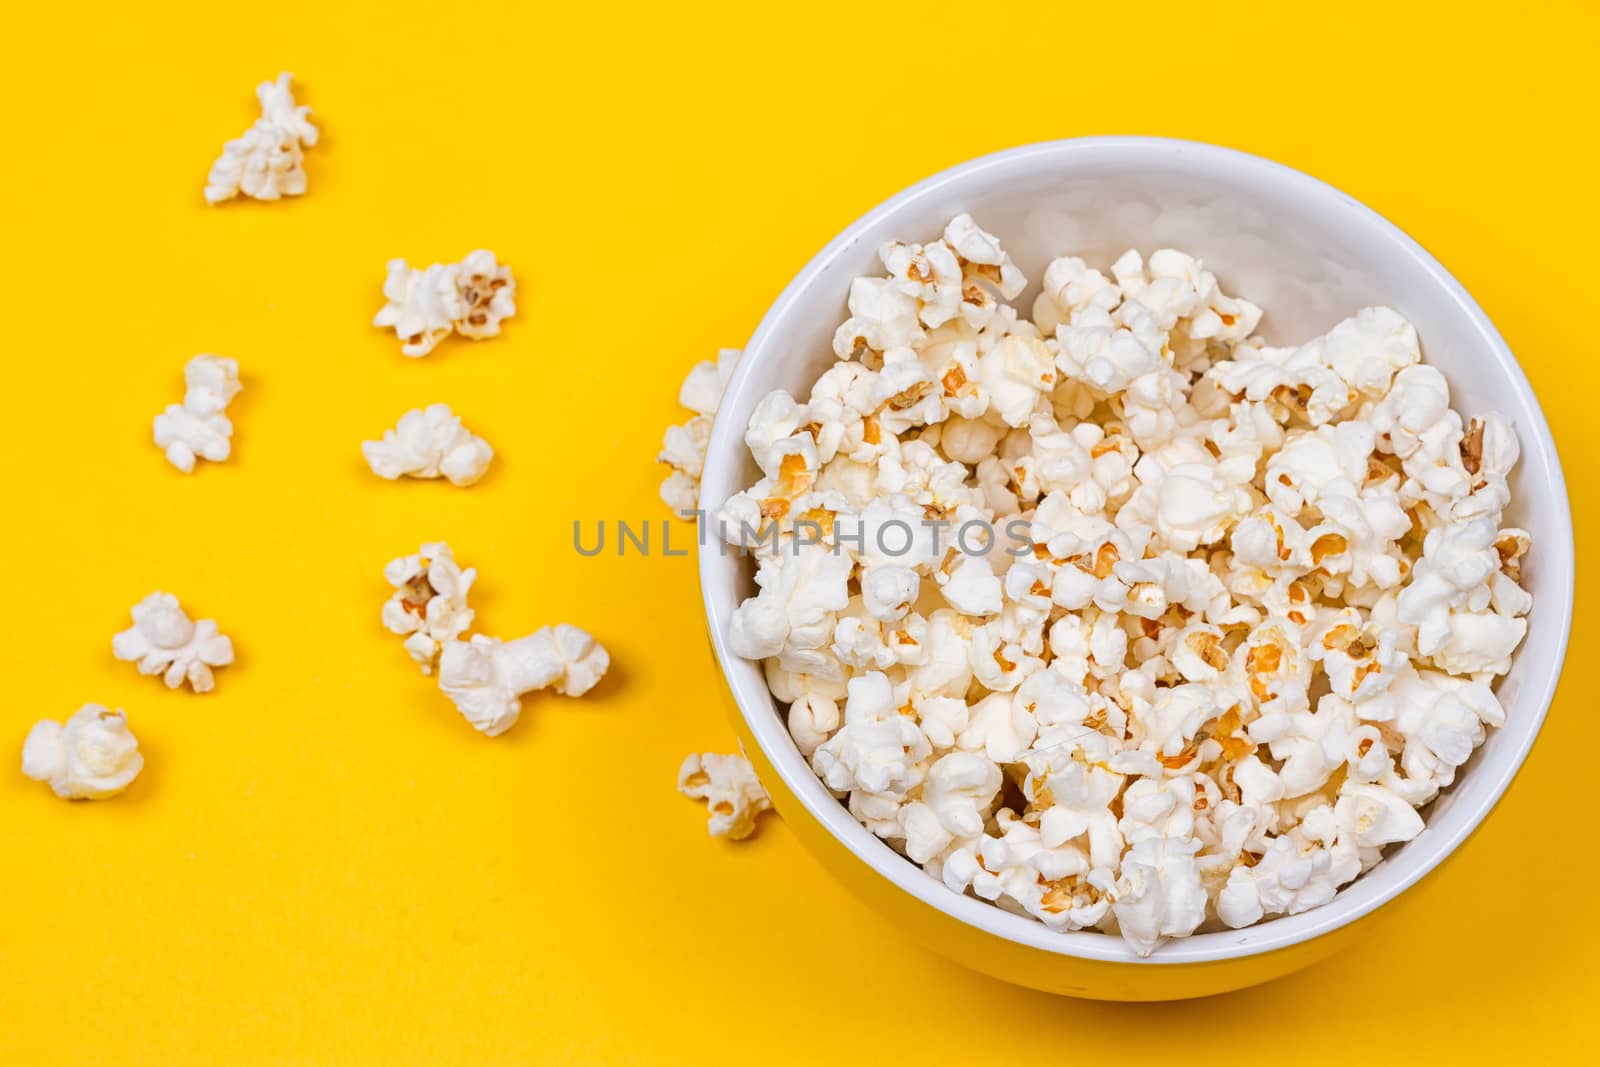 Bowl of Delicious Popcorn spilling onto a yellow background